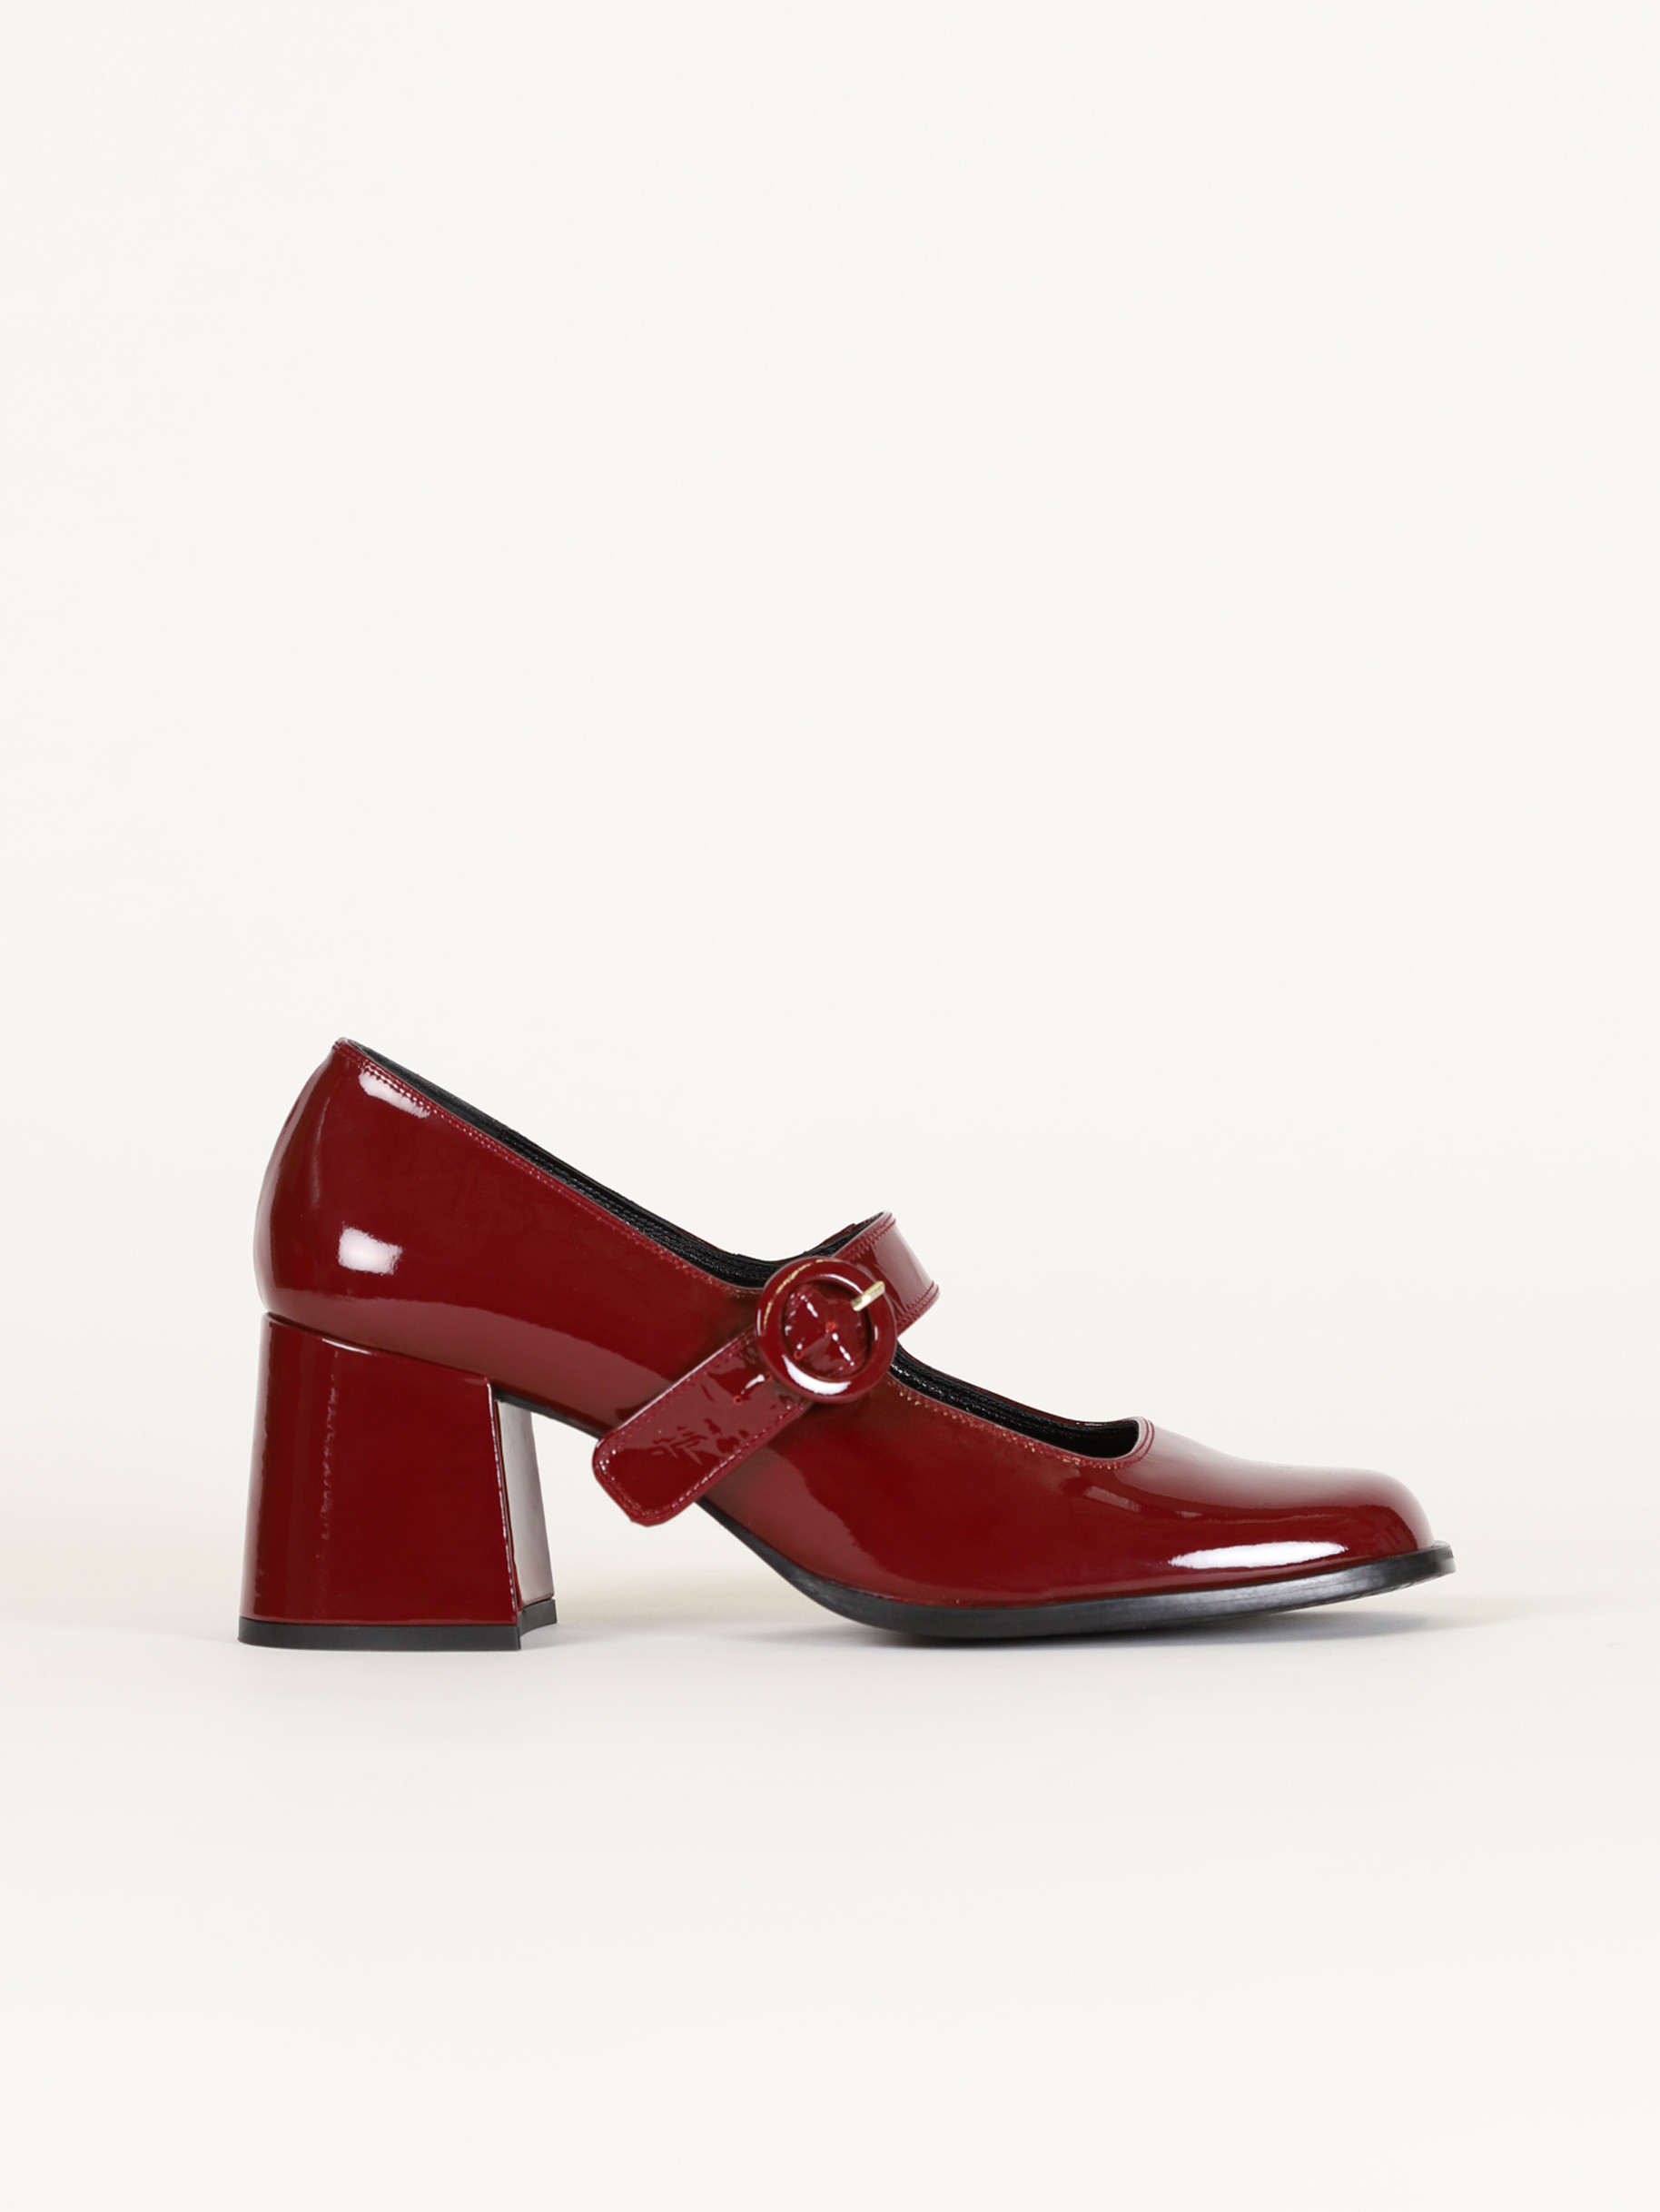 Burgundy patent leather Mary Janes